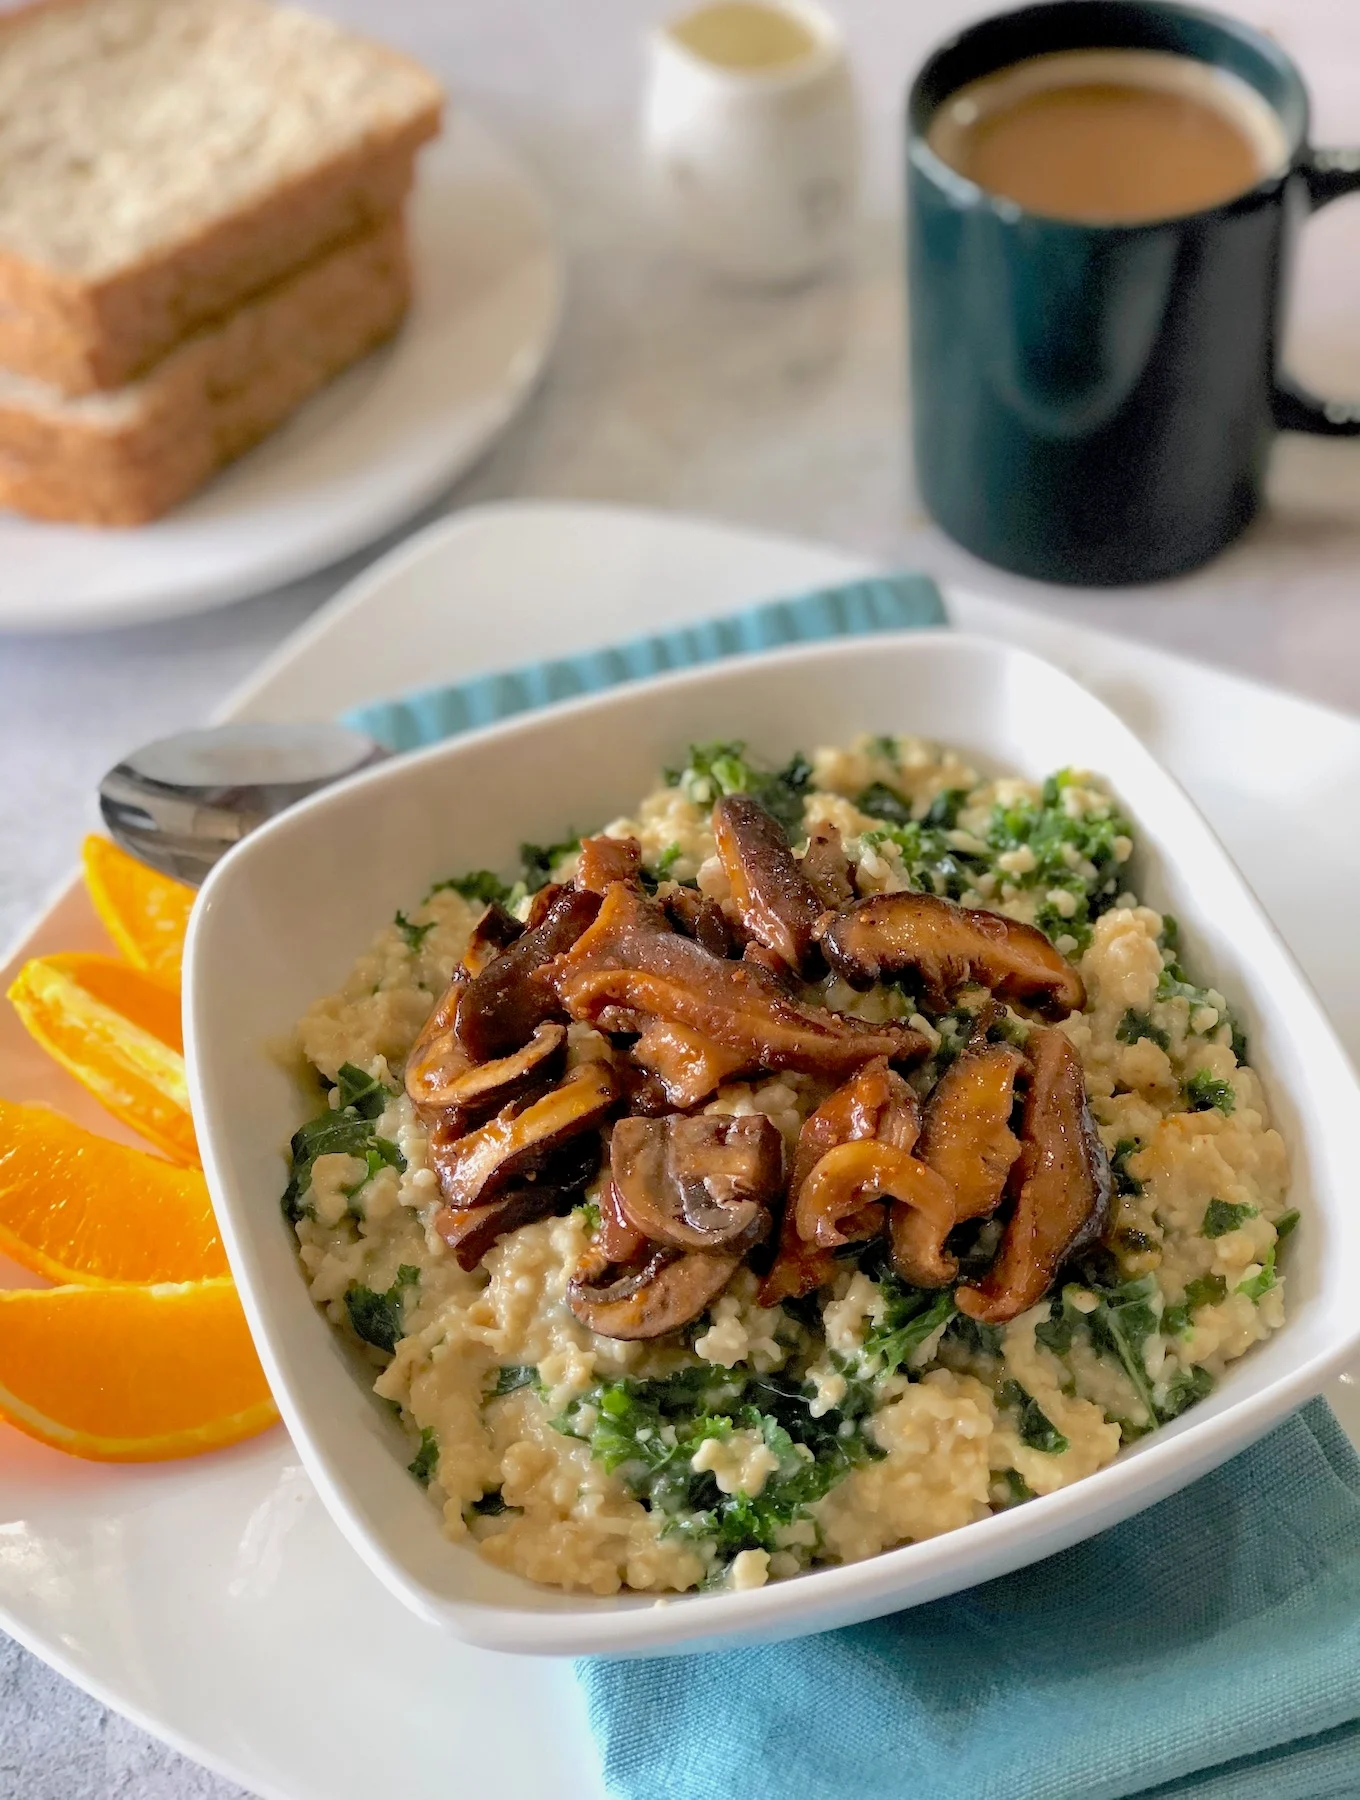 Steel cut oats and wilted spinach leaves in a gooey yellow sauce topped with crispy brown mushroom slices.